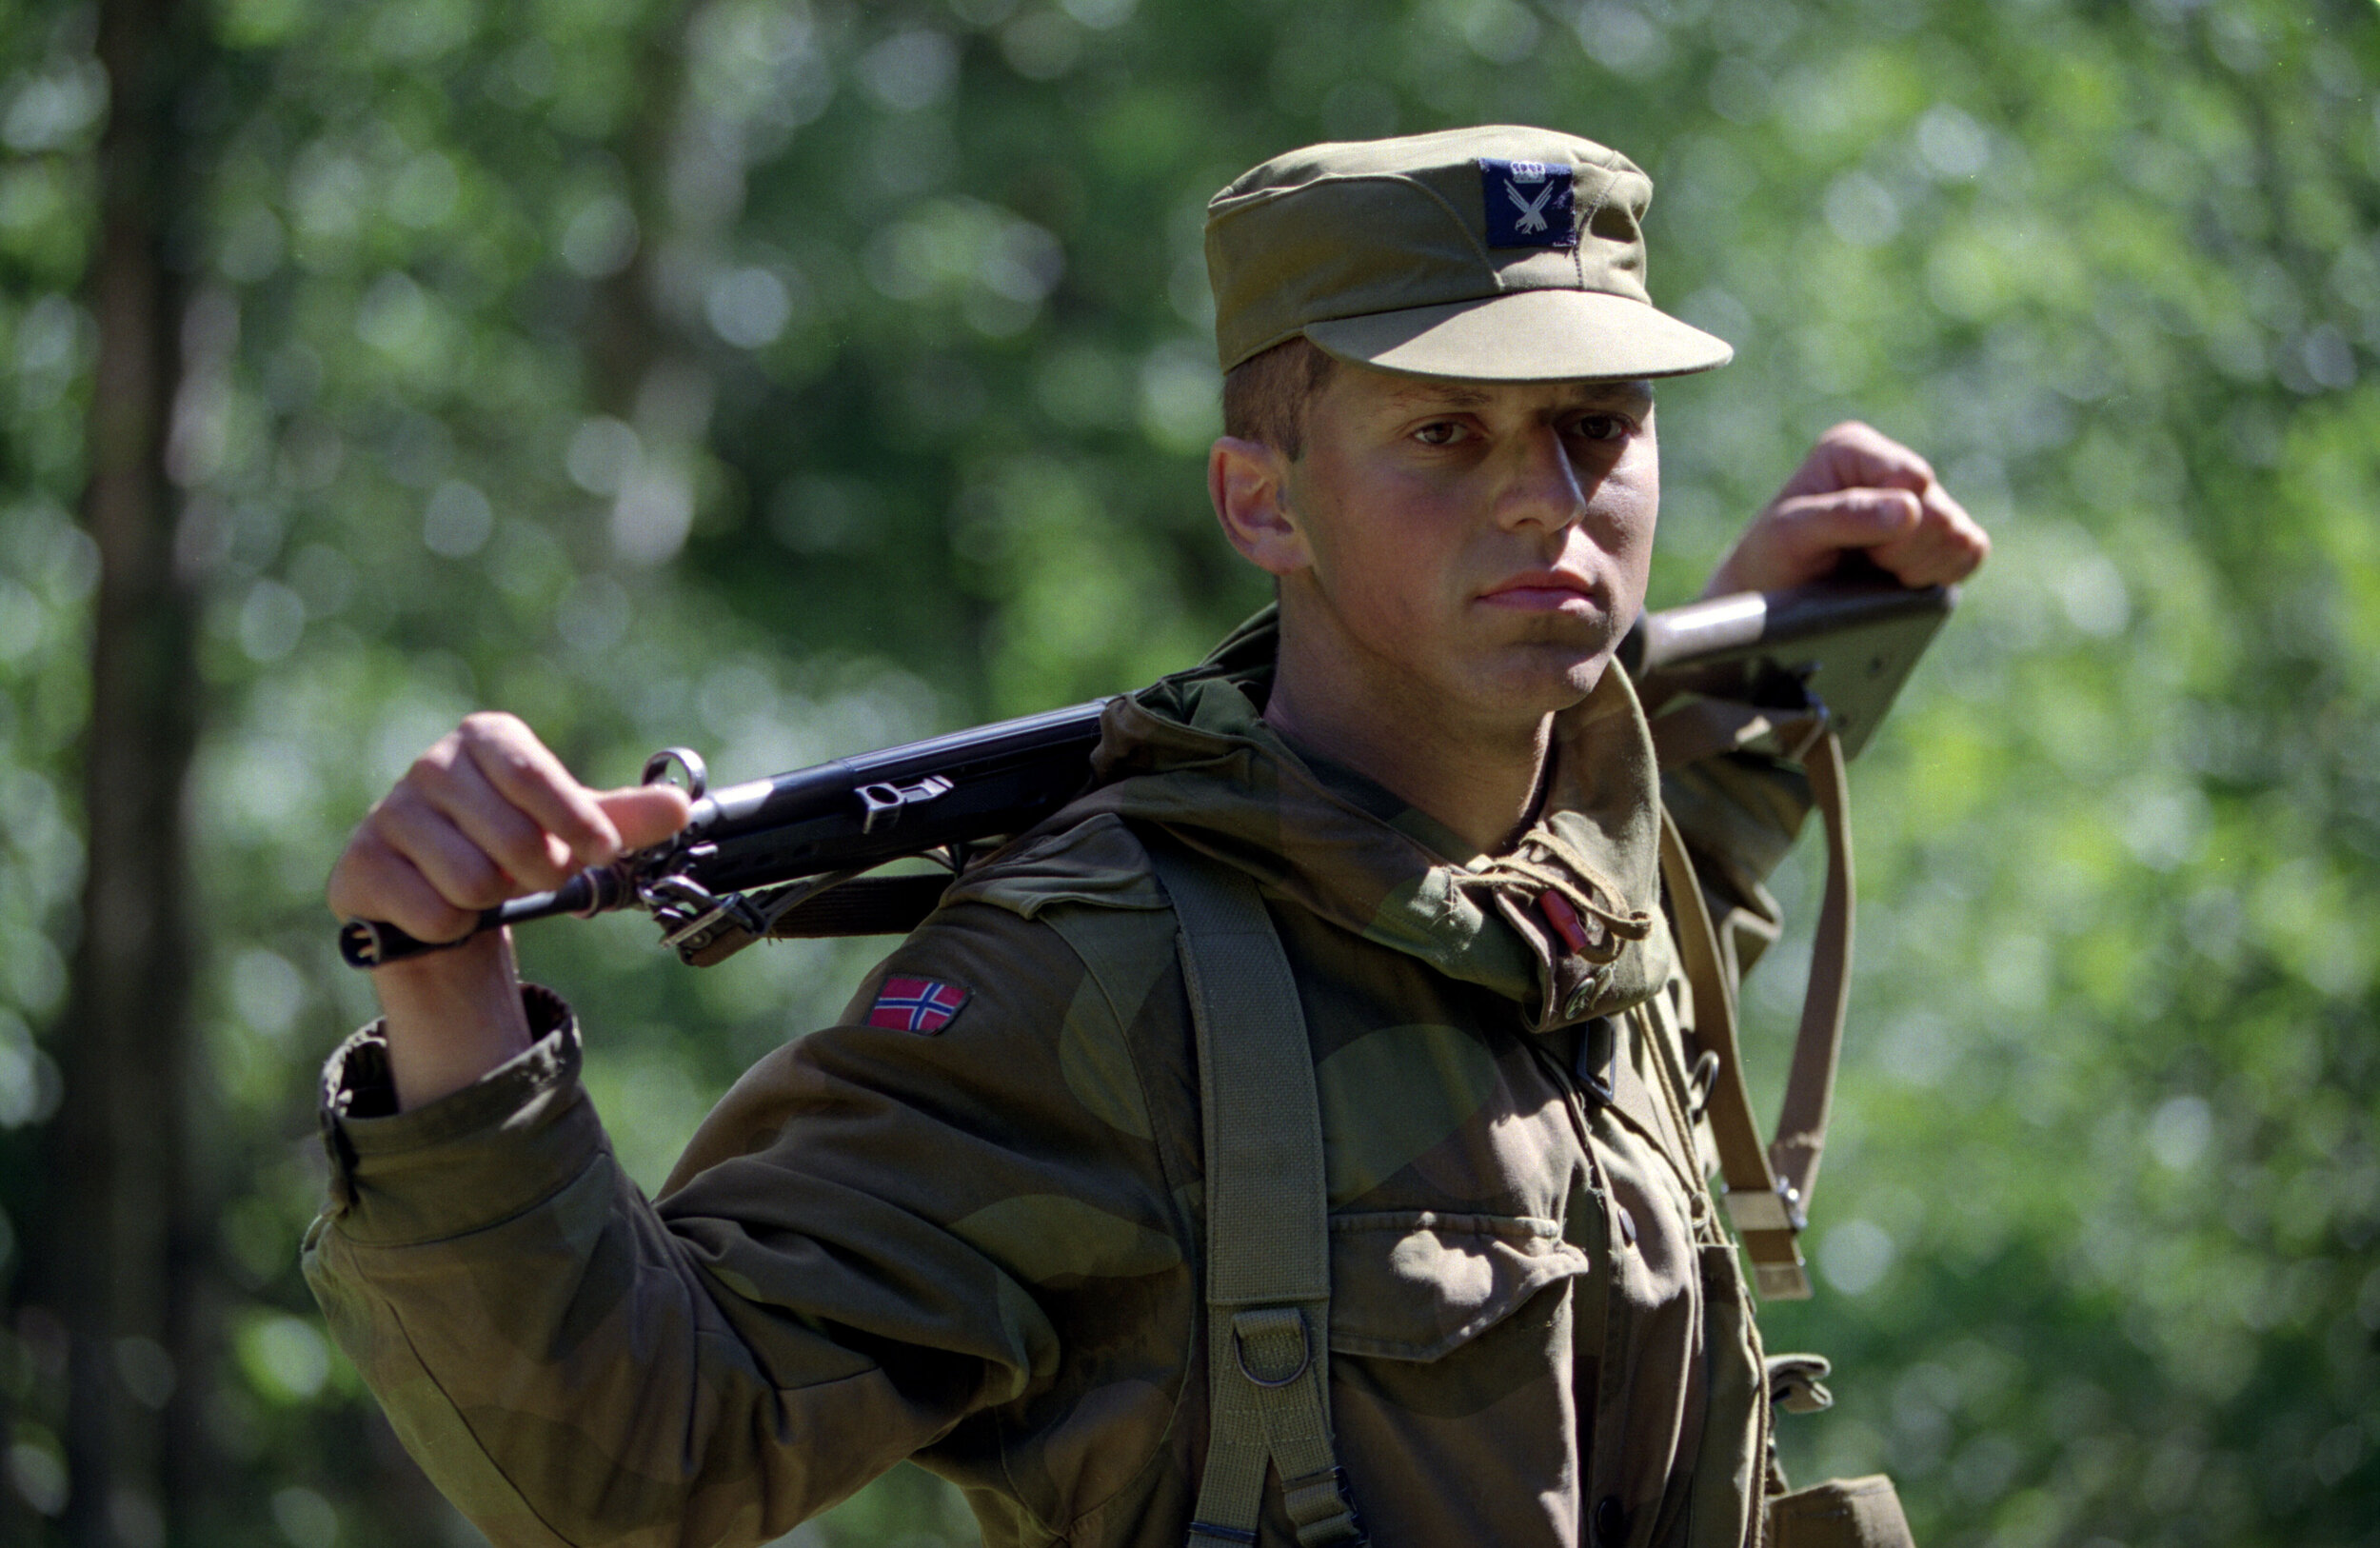  Norwegian Air Force Officer School trainee on an exercise, 1998 